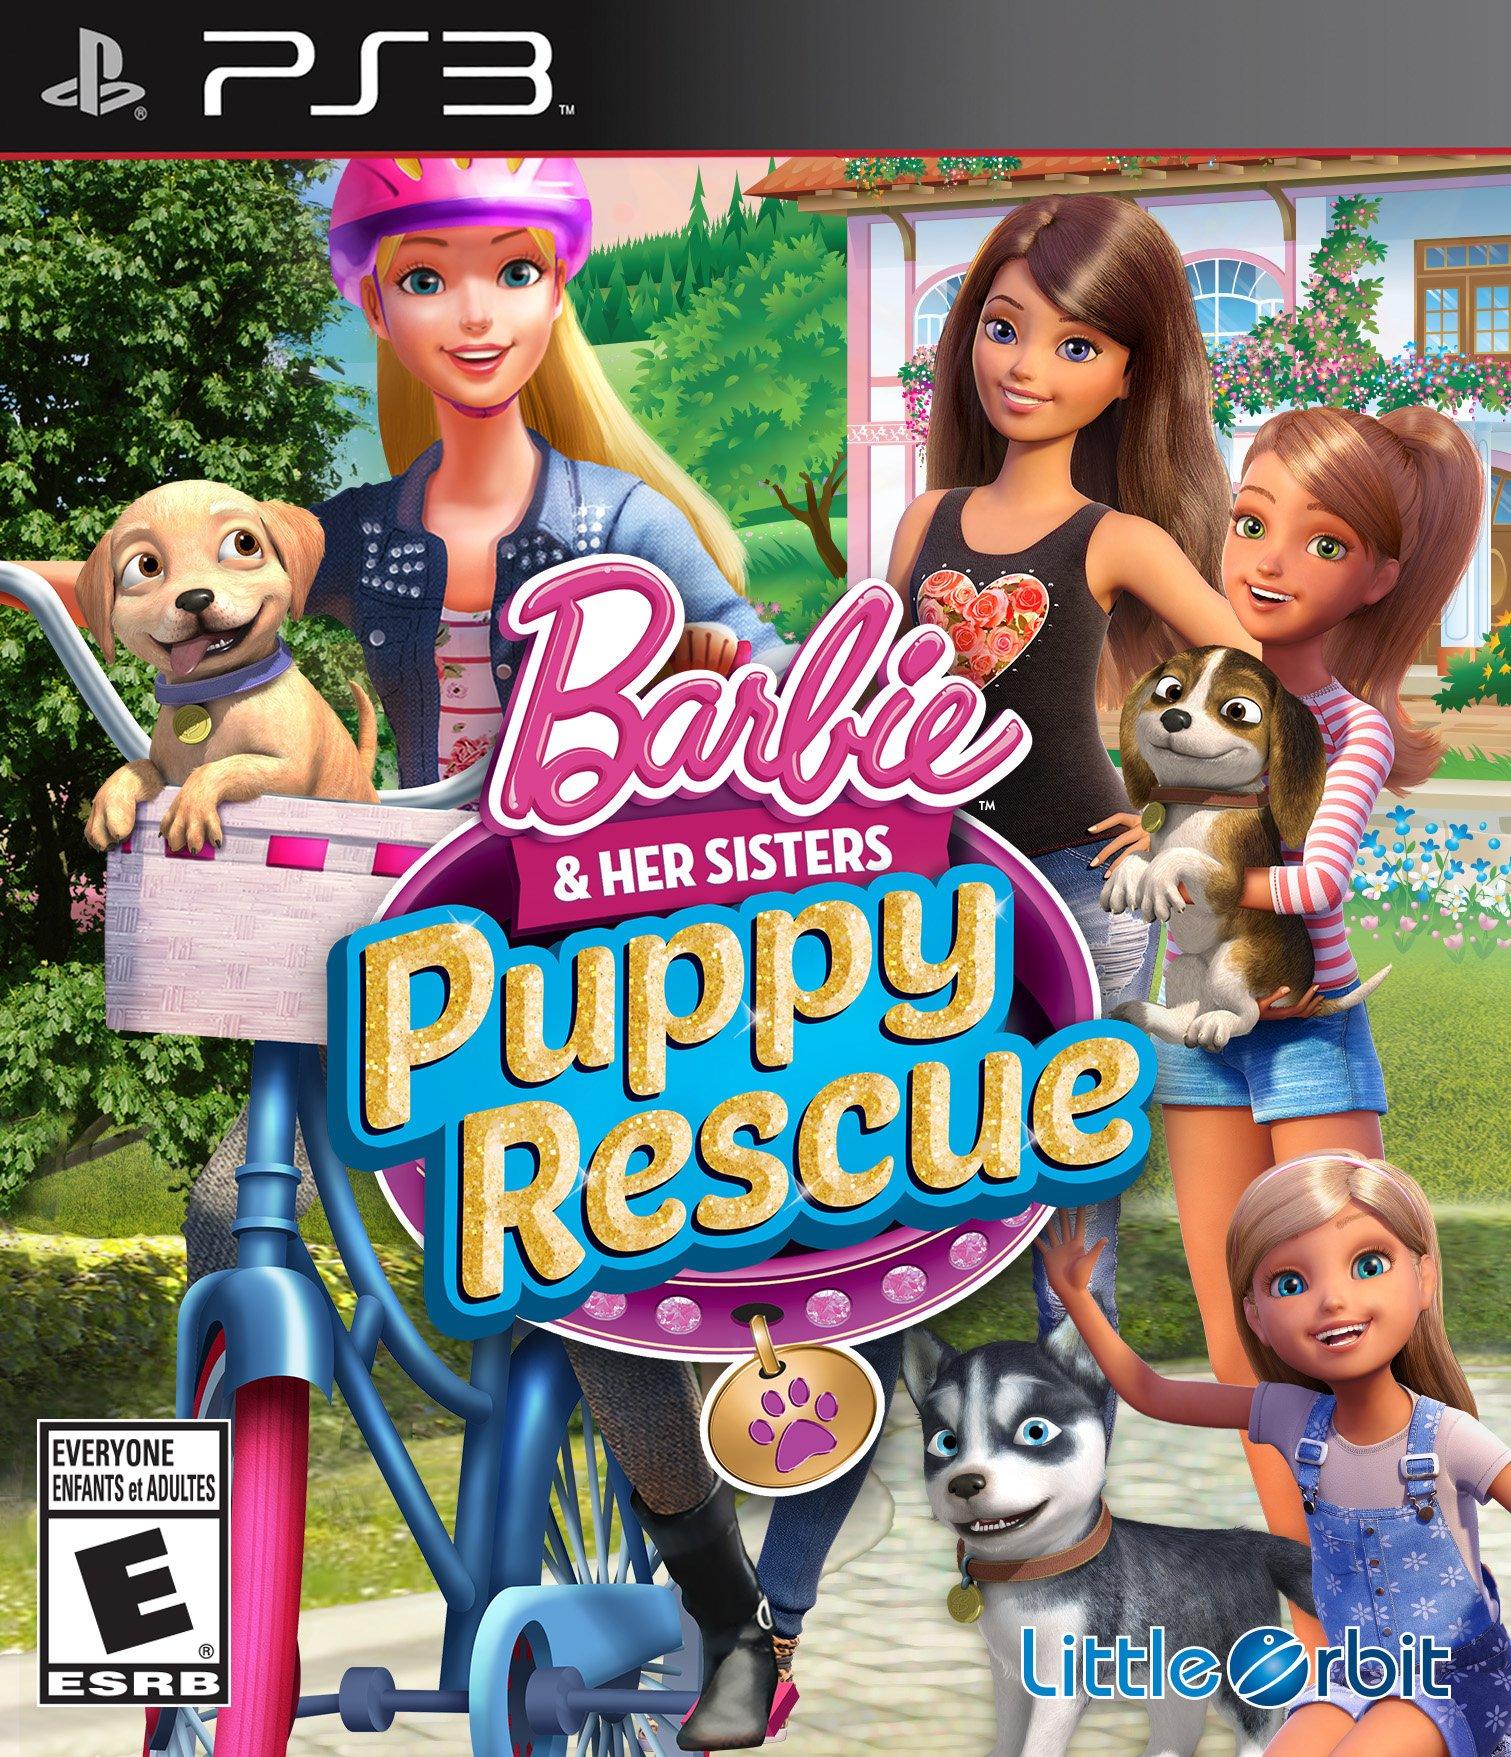 ps4 games for kids girls